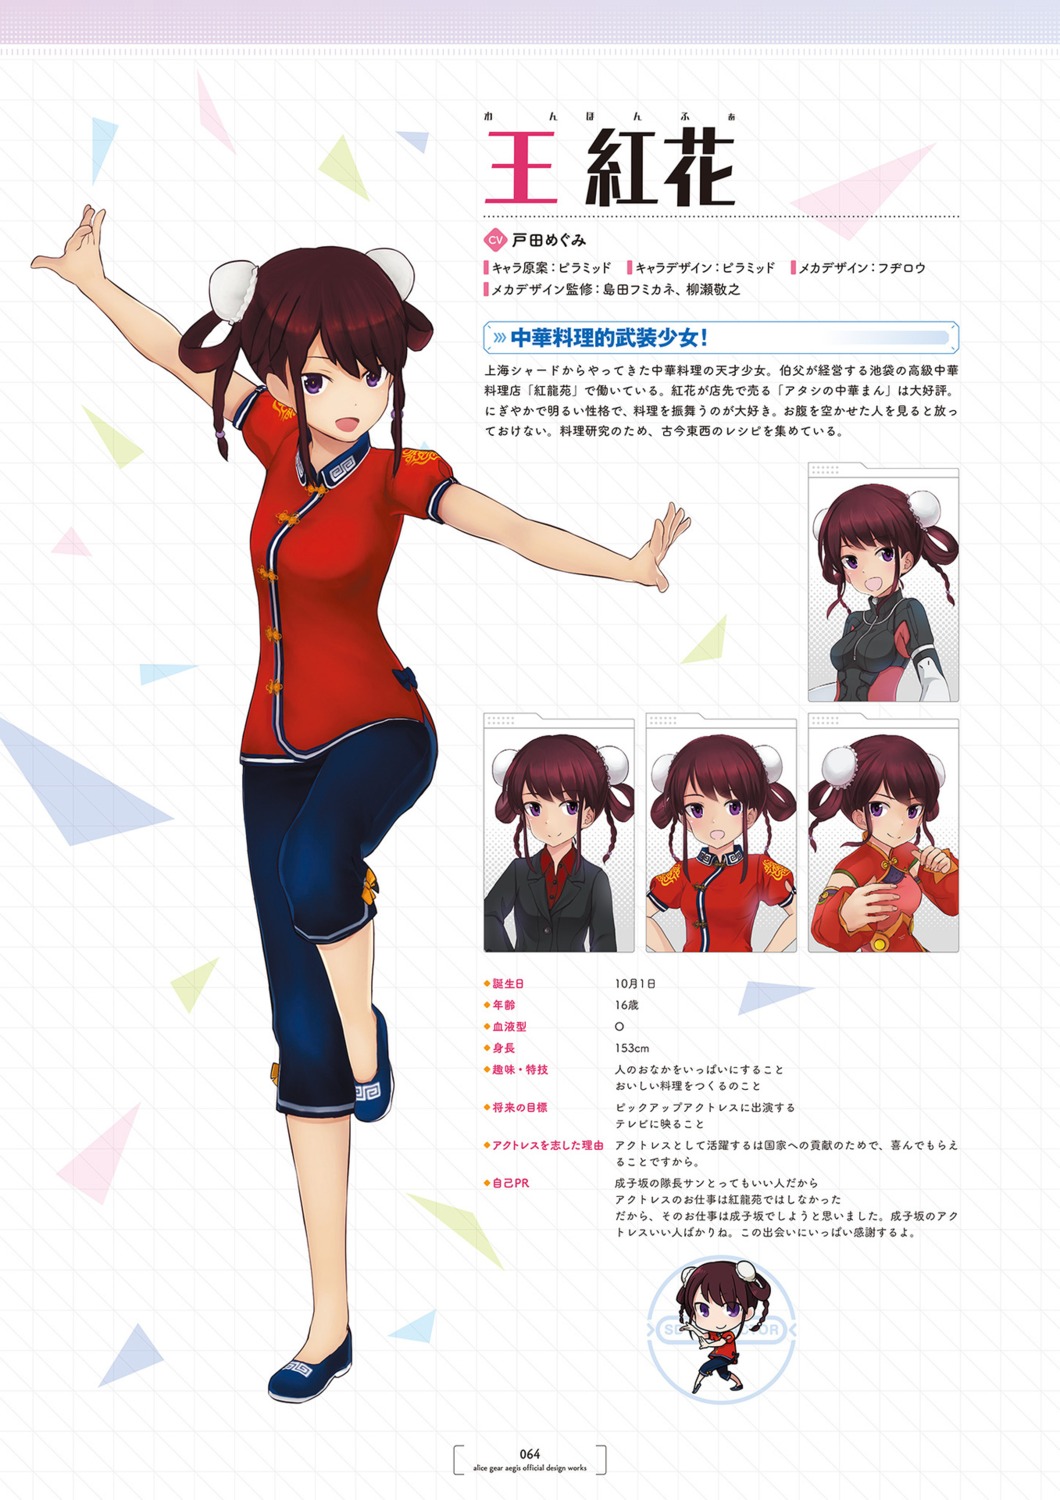 alice_gear_aegis asian_clothes business_suit character_design chibi profile_page tagme wang_honghua